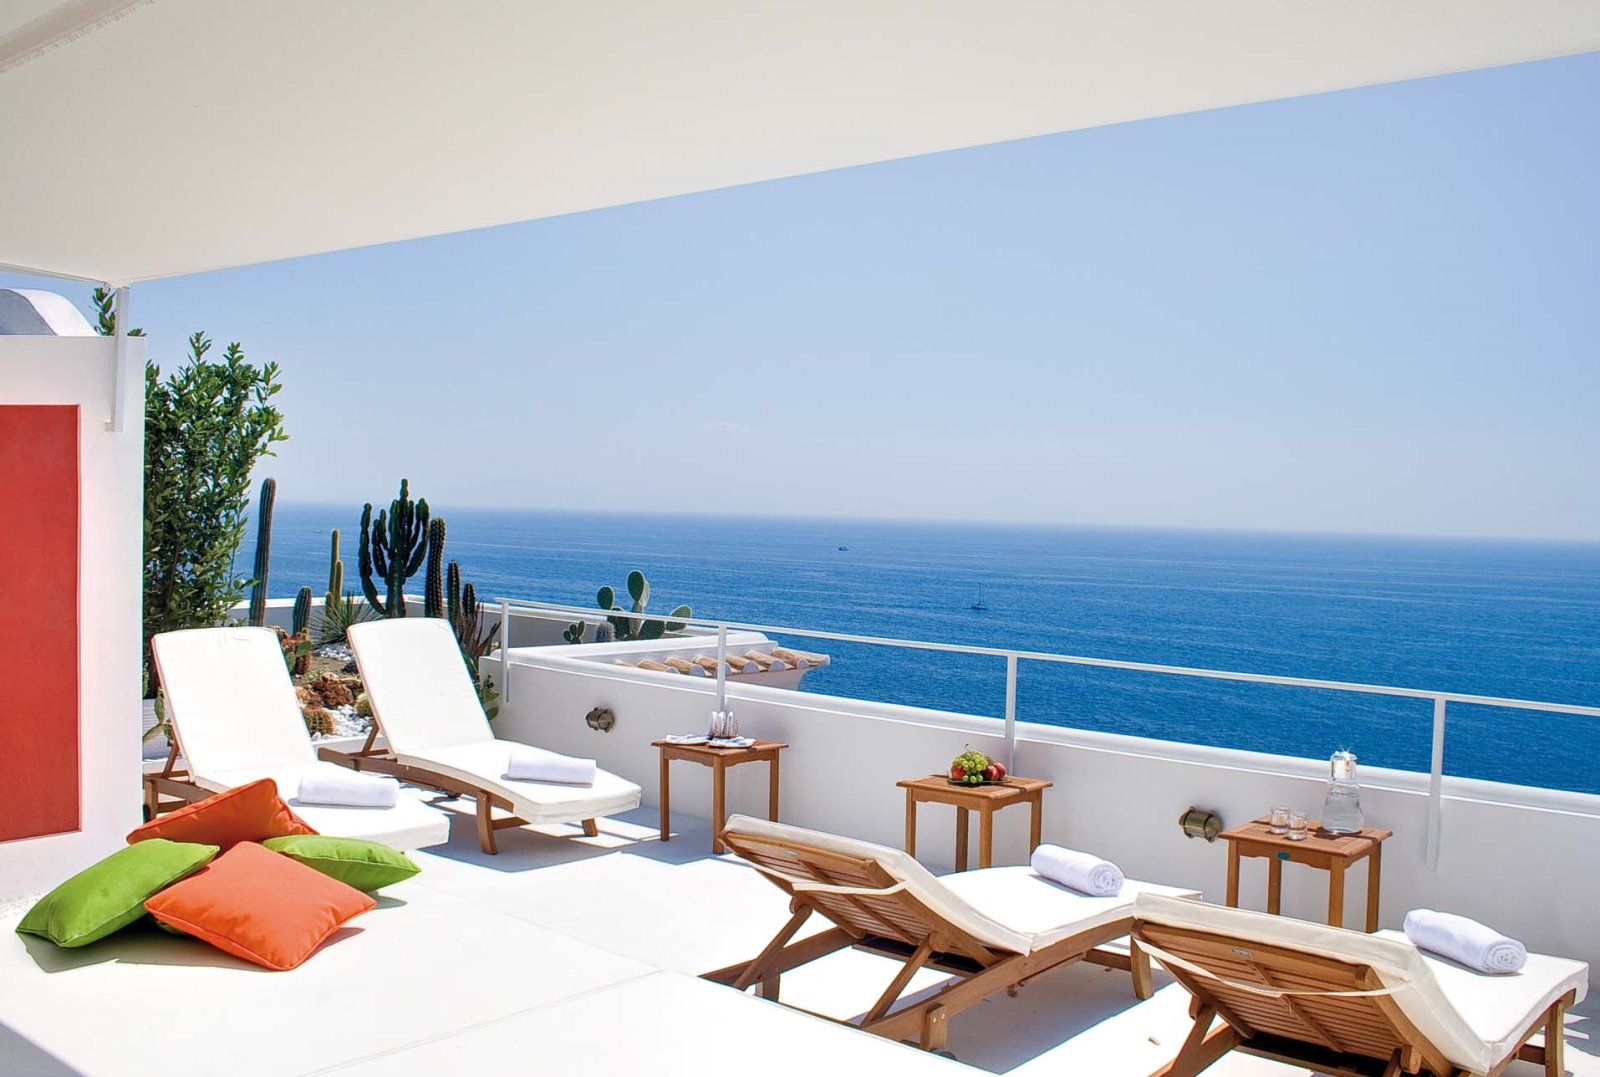 Balcony with sun loungers, tables, cacti and sea view at Villa di Praiano on the Amalfi Coast, Italy